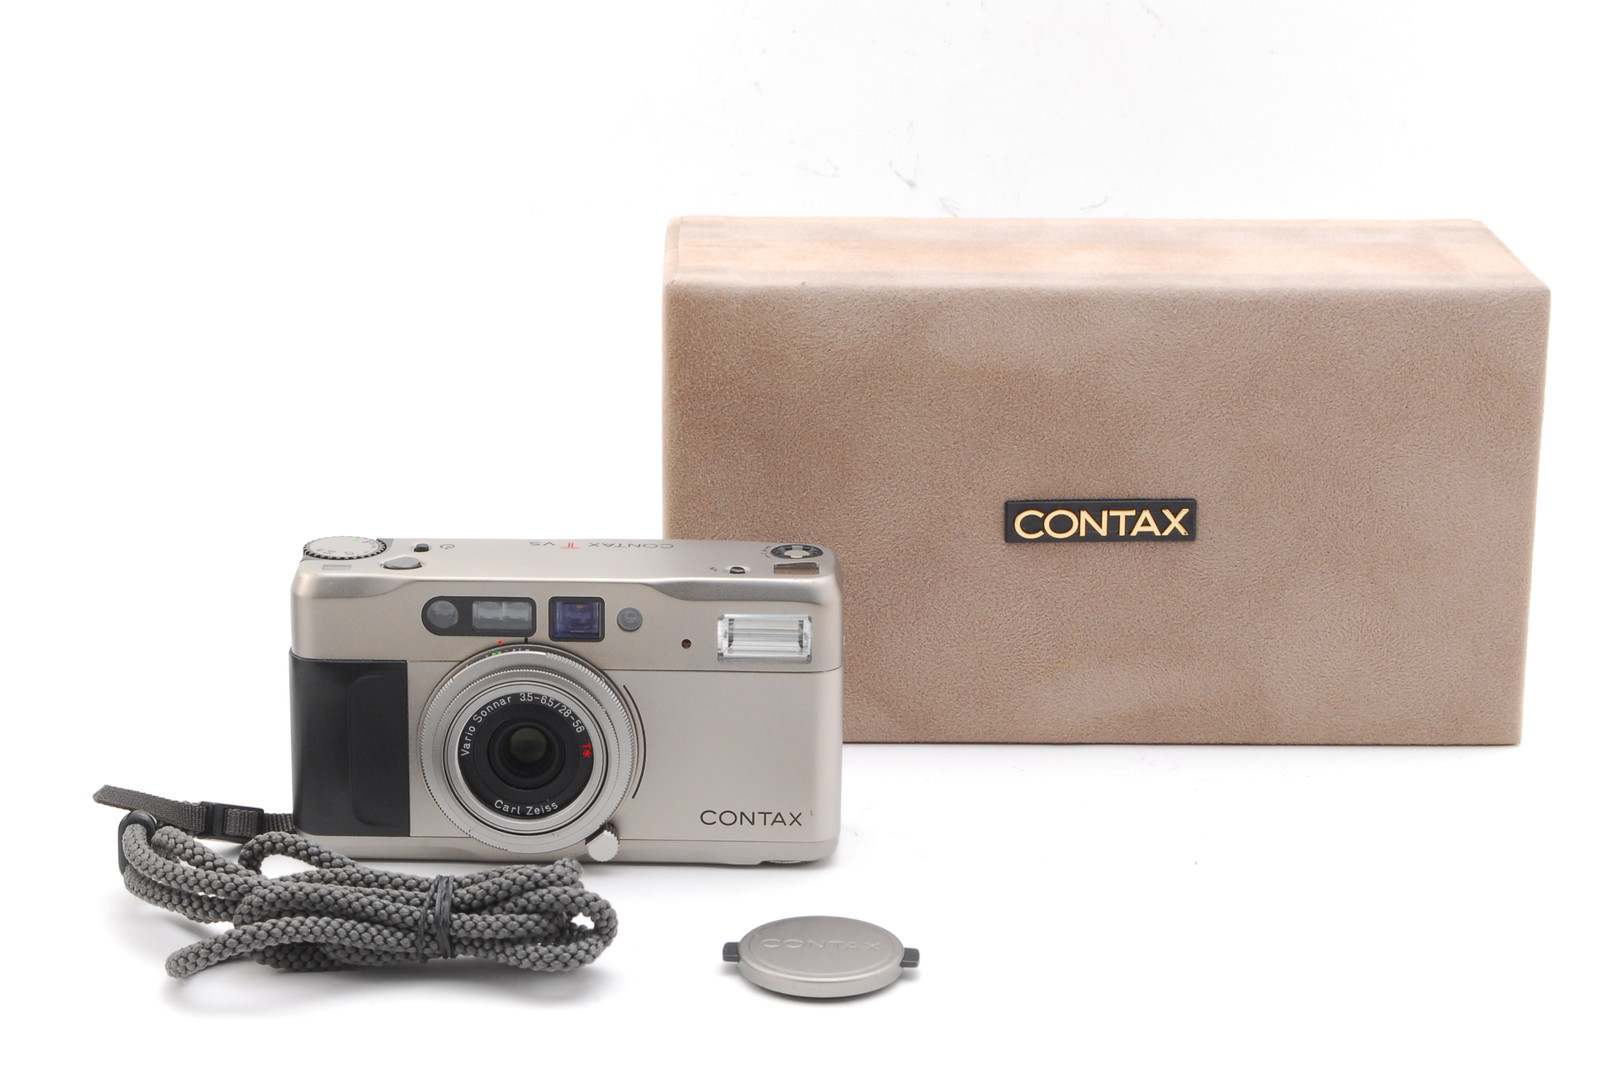 PROMOTION.NEAR MINT Contax TVS 35mm Film Point & Shoot Camera, Data Back, Box from Japan